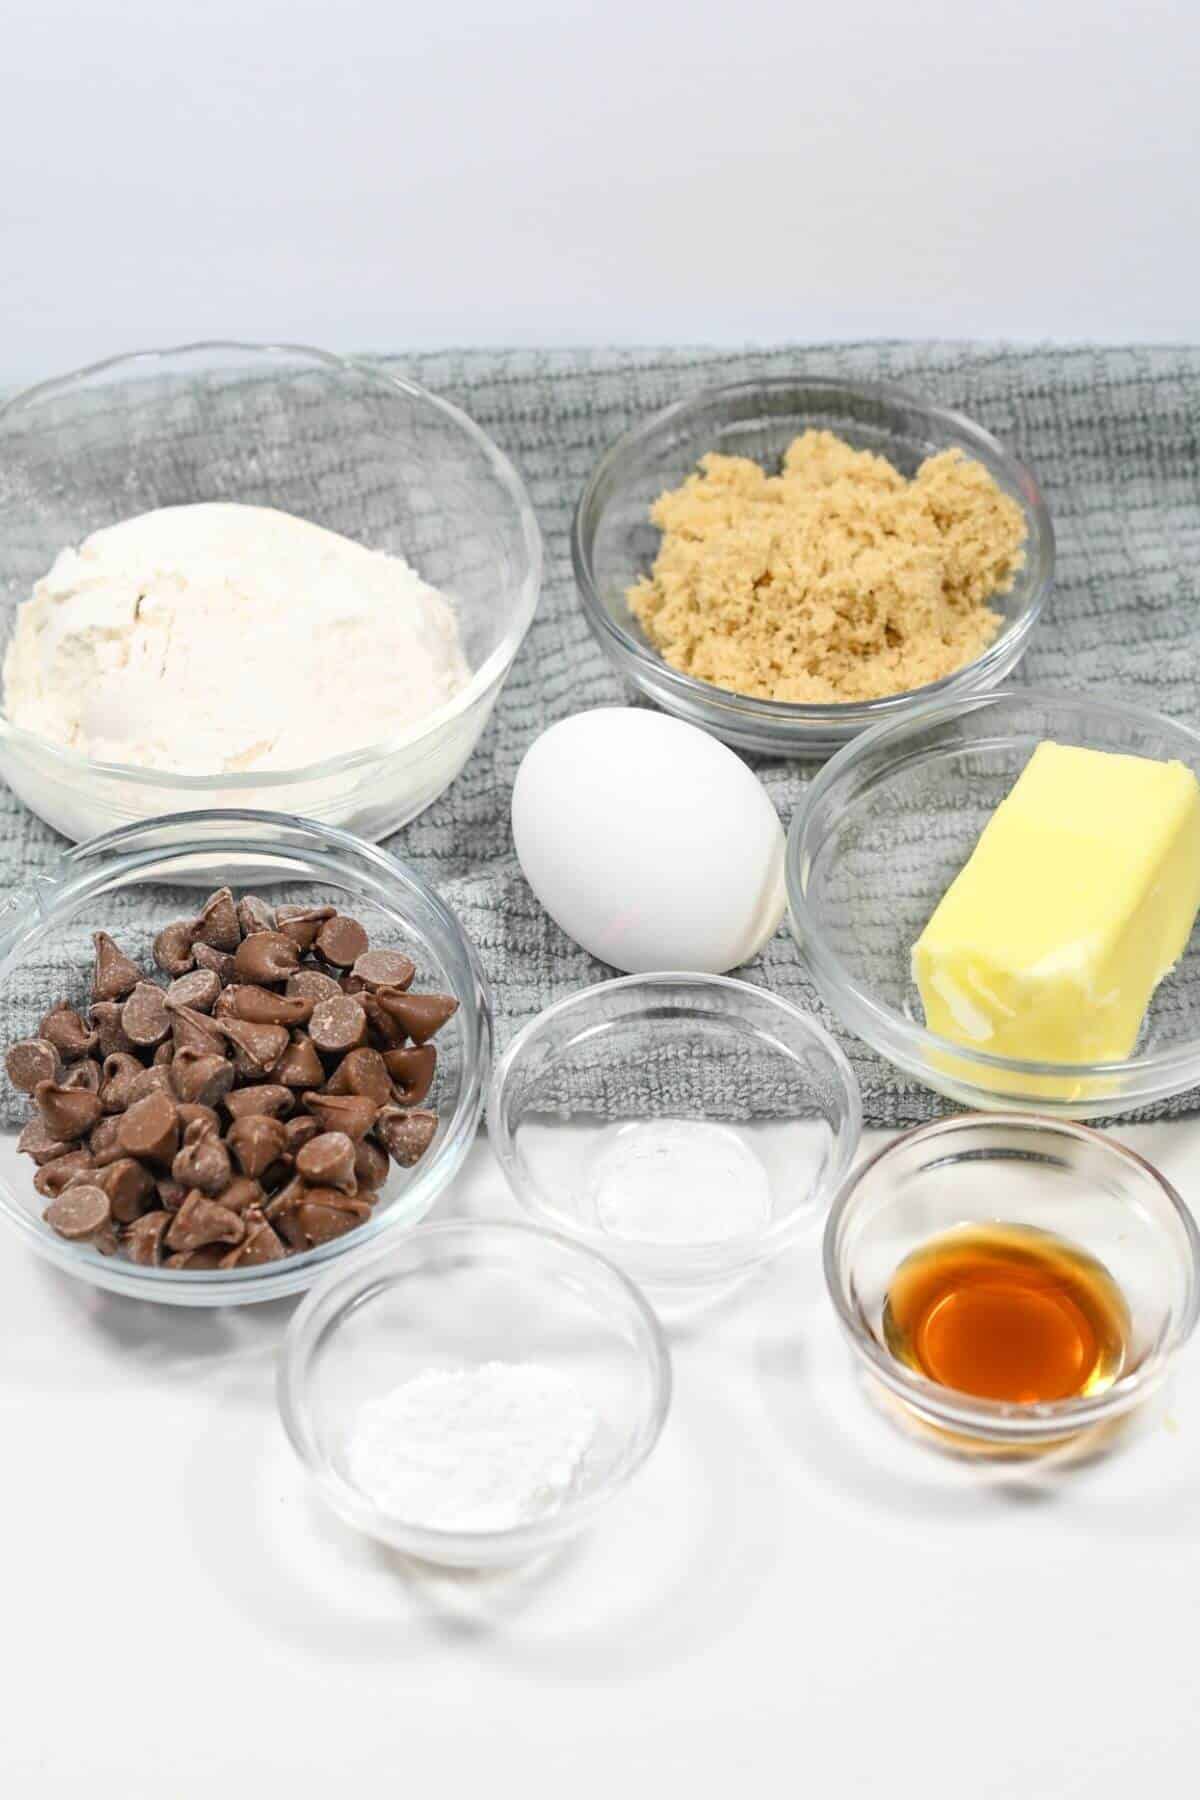 Chocolate chip cookie ingredients on a table.